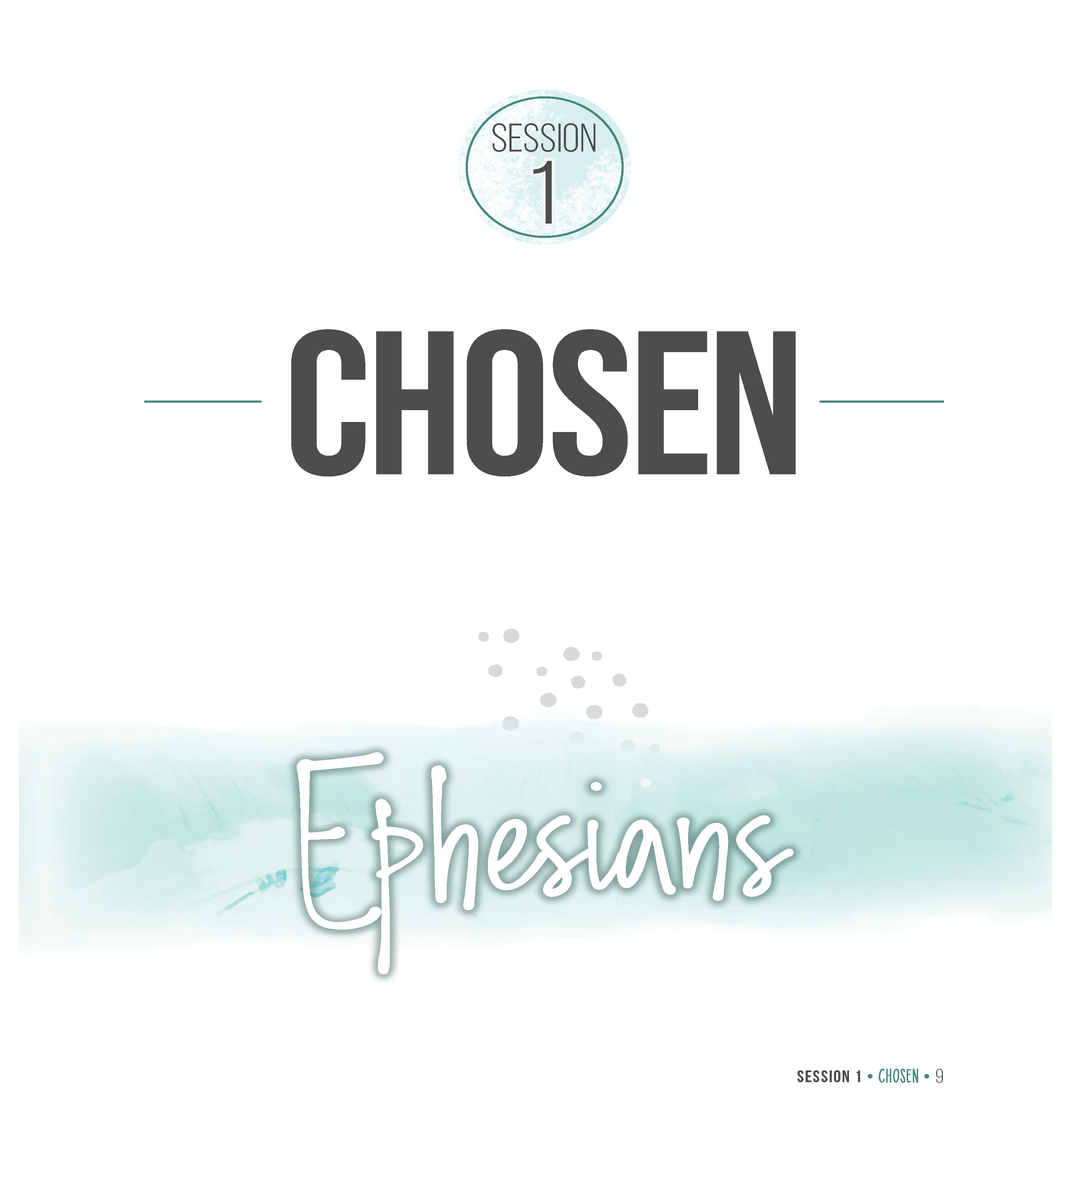 Ephesians Study Guide with DVD